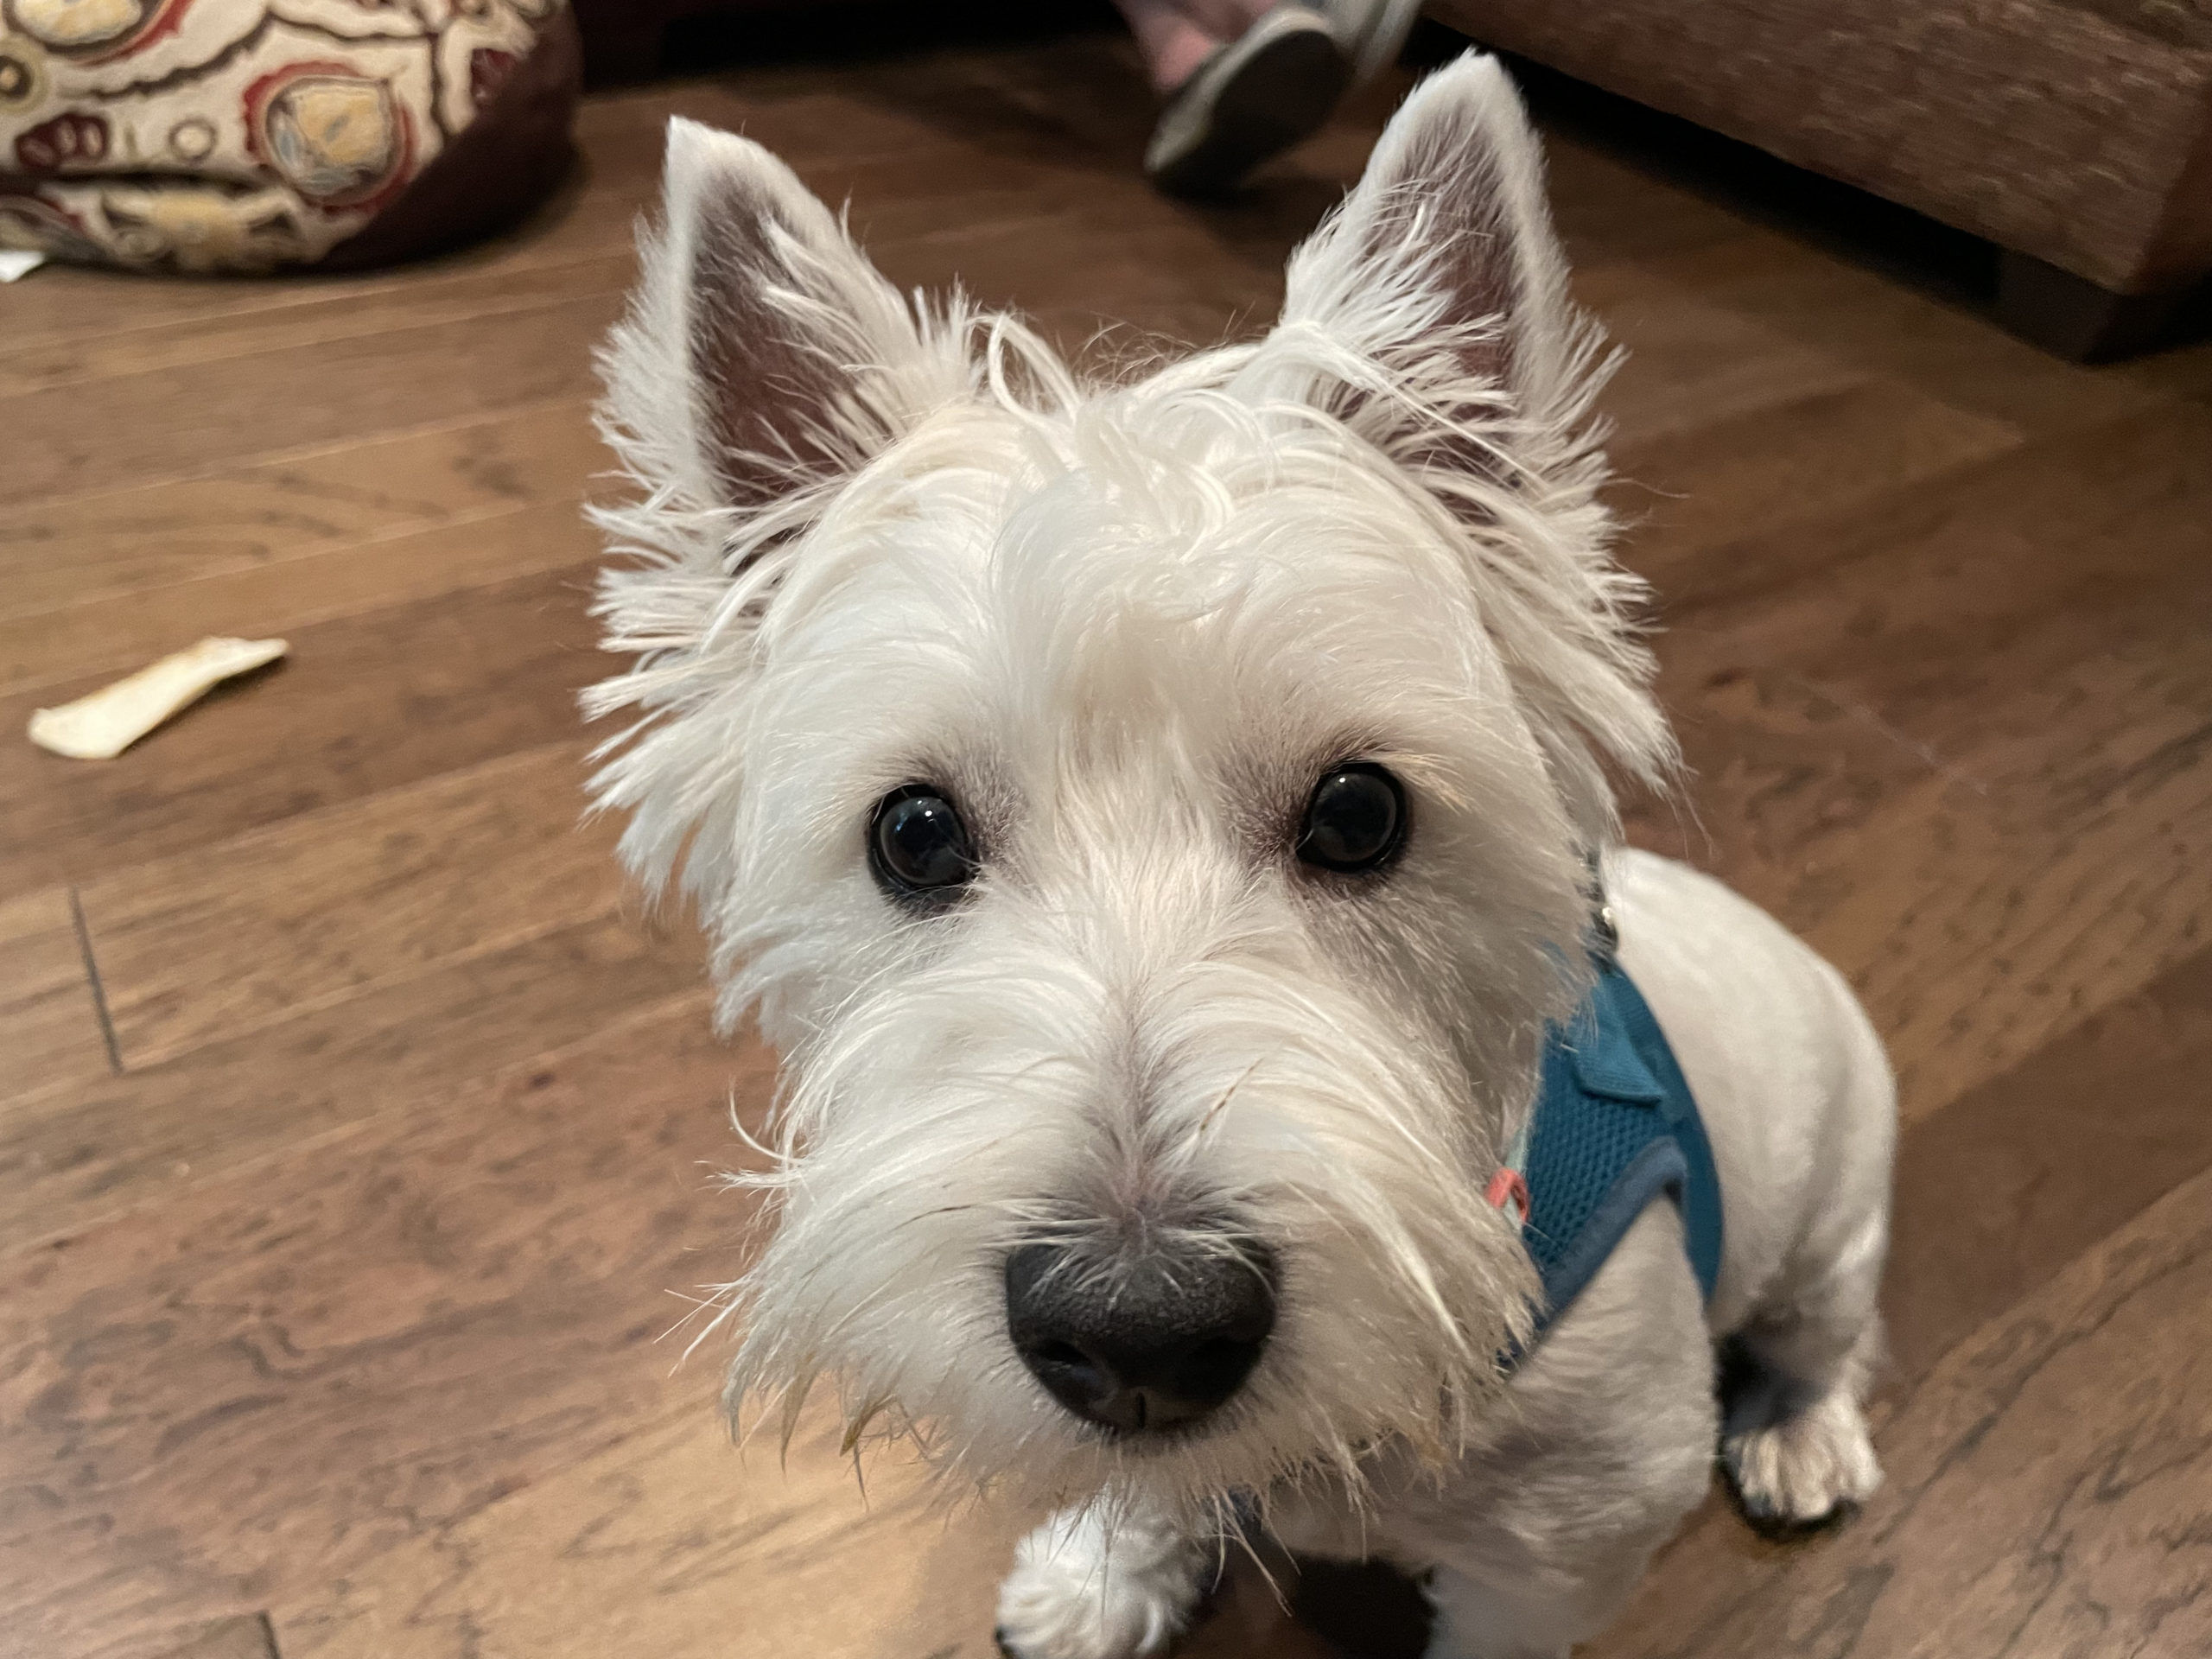 Finn Dundee Westie scaled - Sharing Some Remedial Potty Training Tips to Help Puppy Finn Go Outside